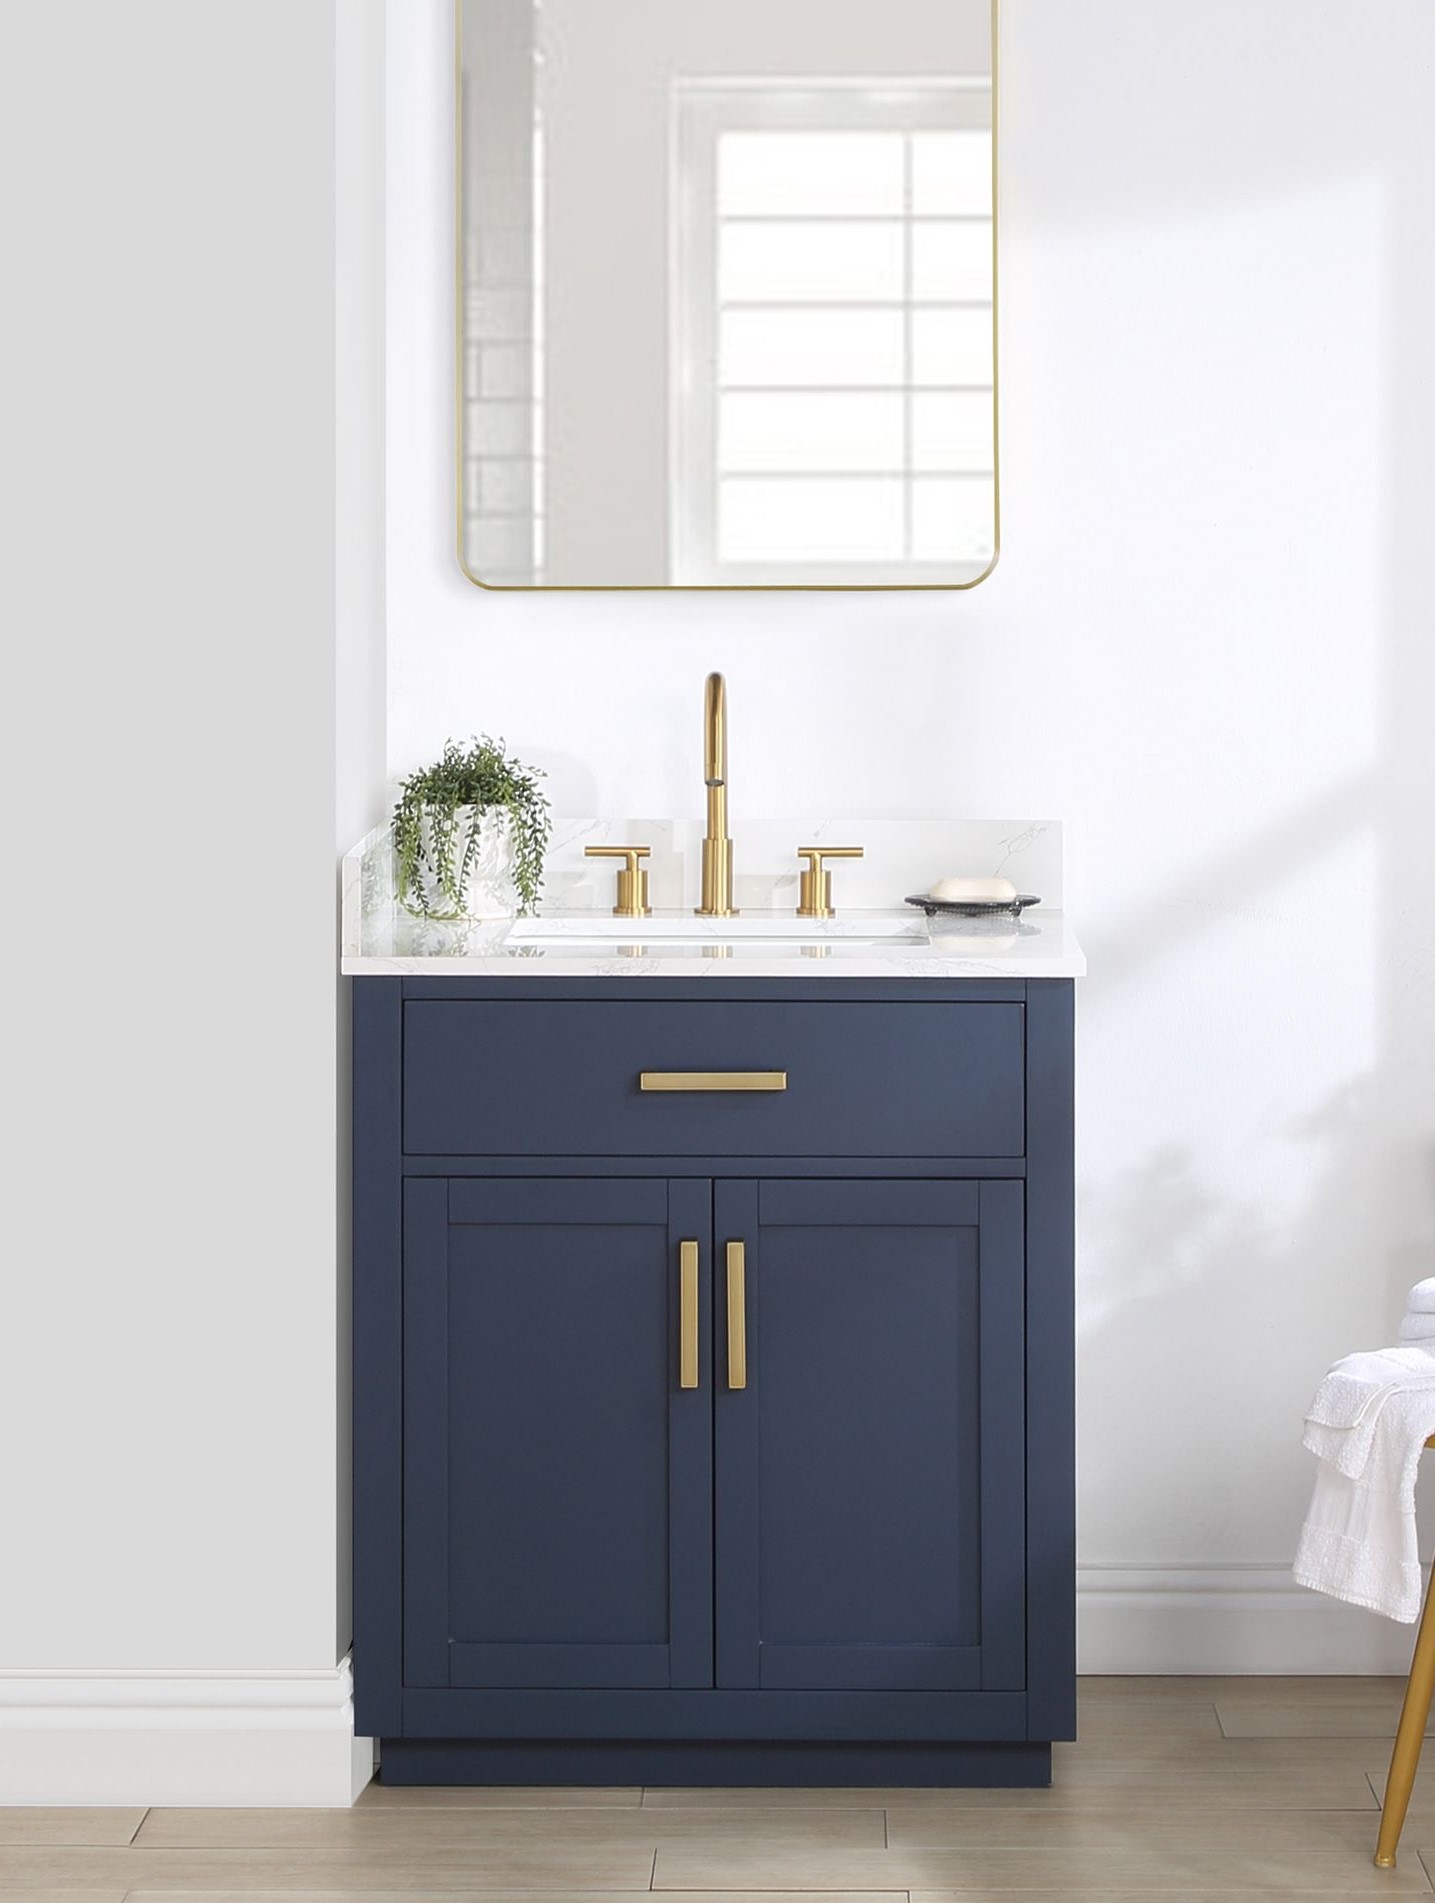 Issac Edwards 30" Single Bathroom Vanity in Royal Blue with Grain White Composite Stone Countertop with Mirror